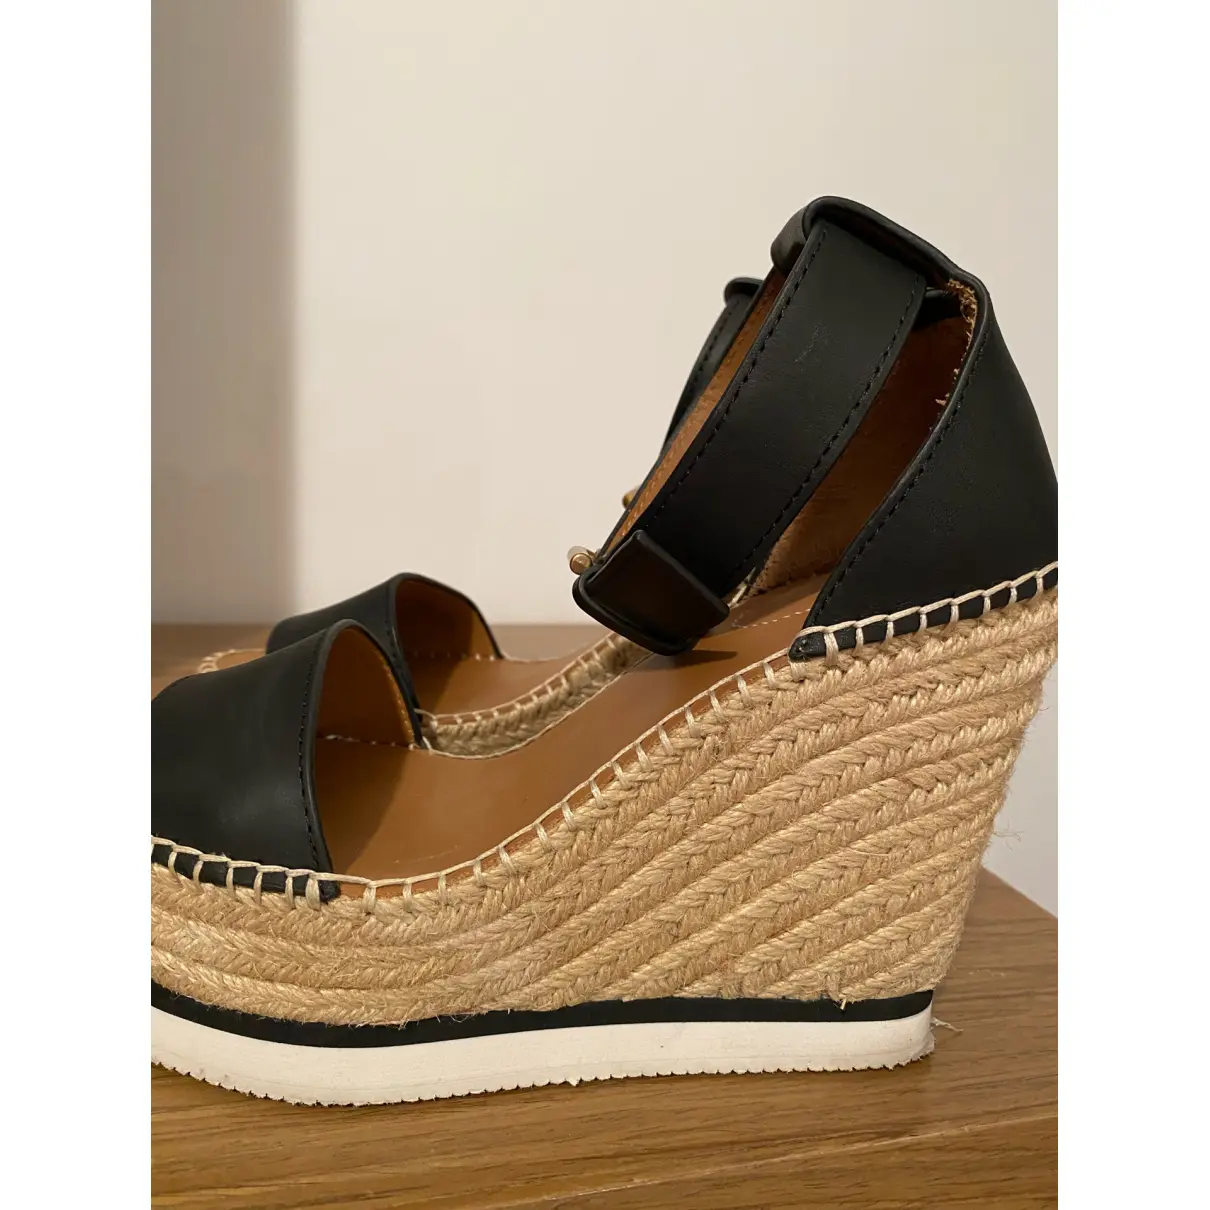 Buy See by Chloé Leather espadrilles online